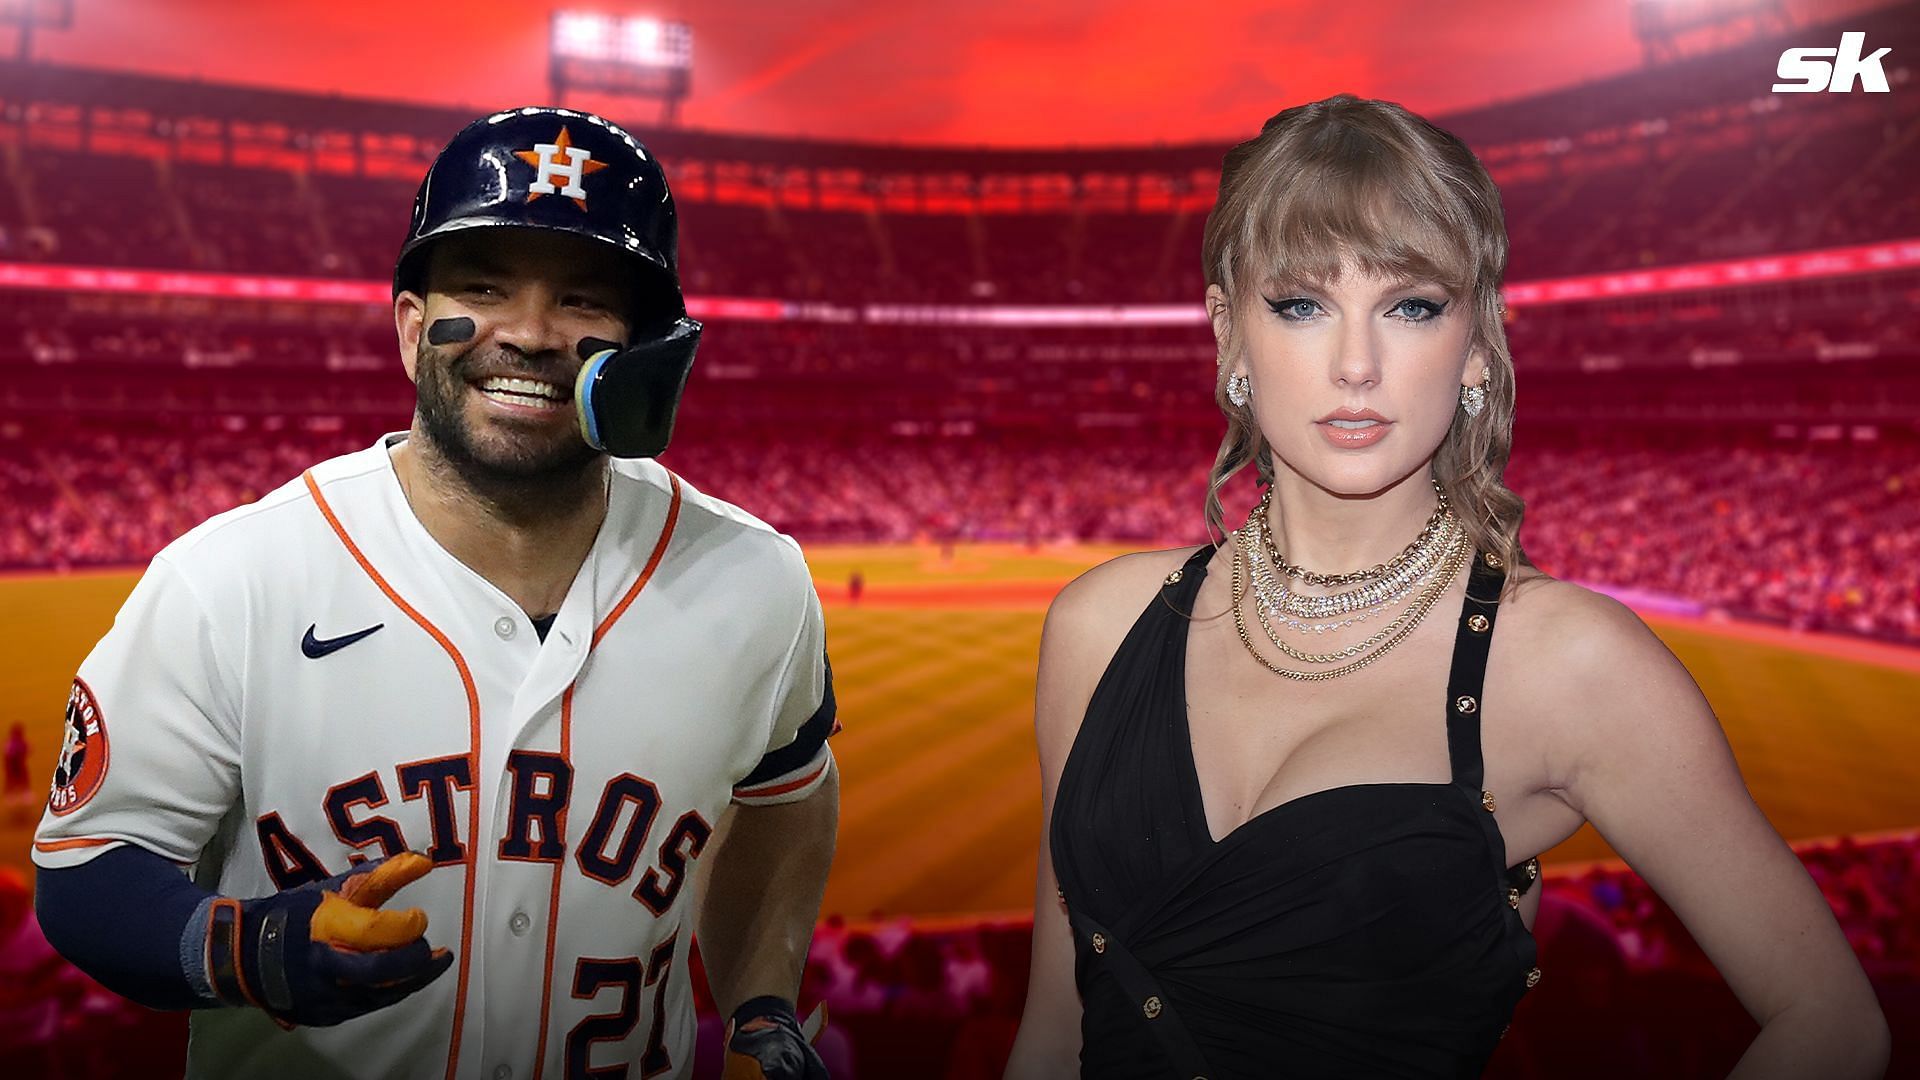 Jose Altuve weighed in on his favorite Taylor Swift song